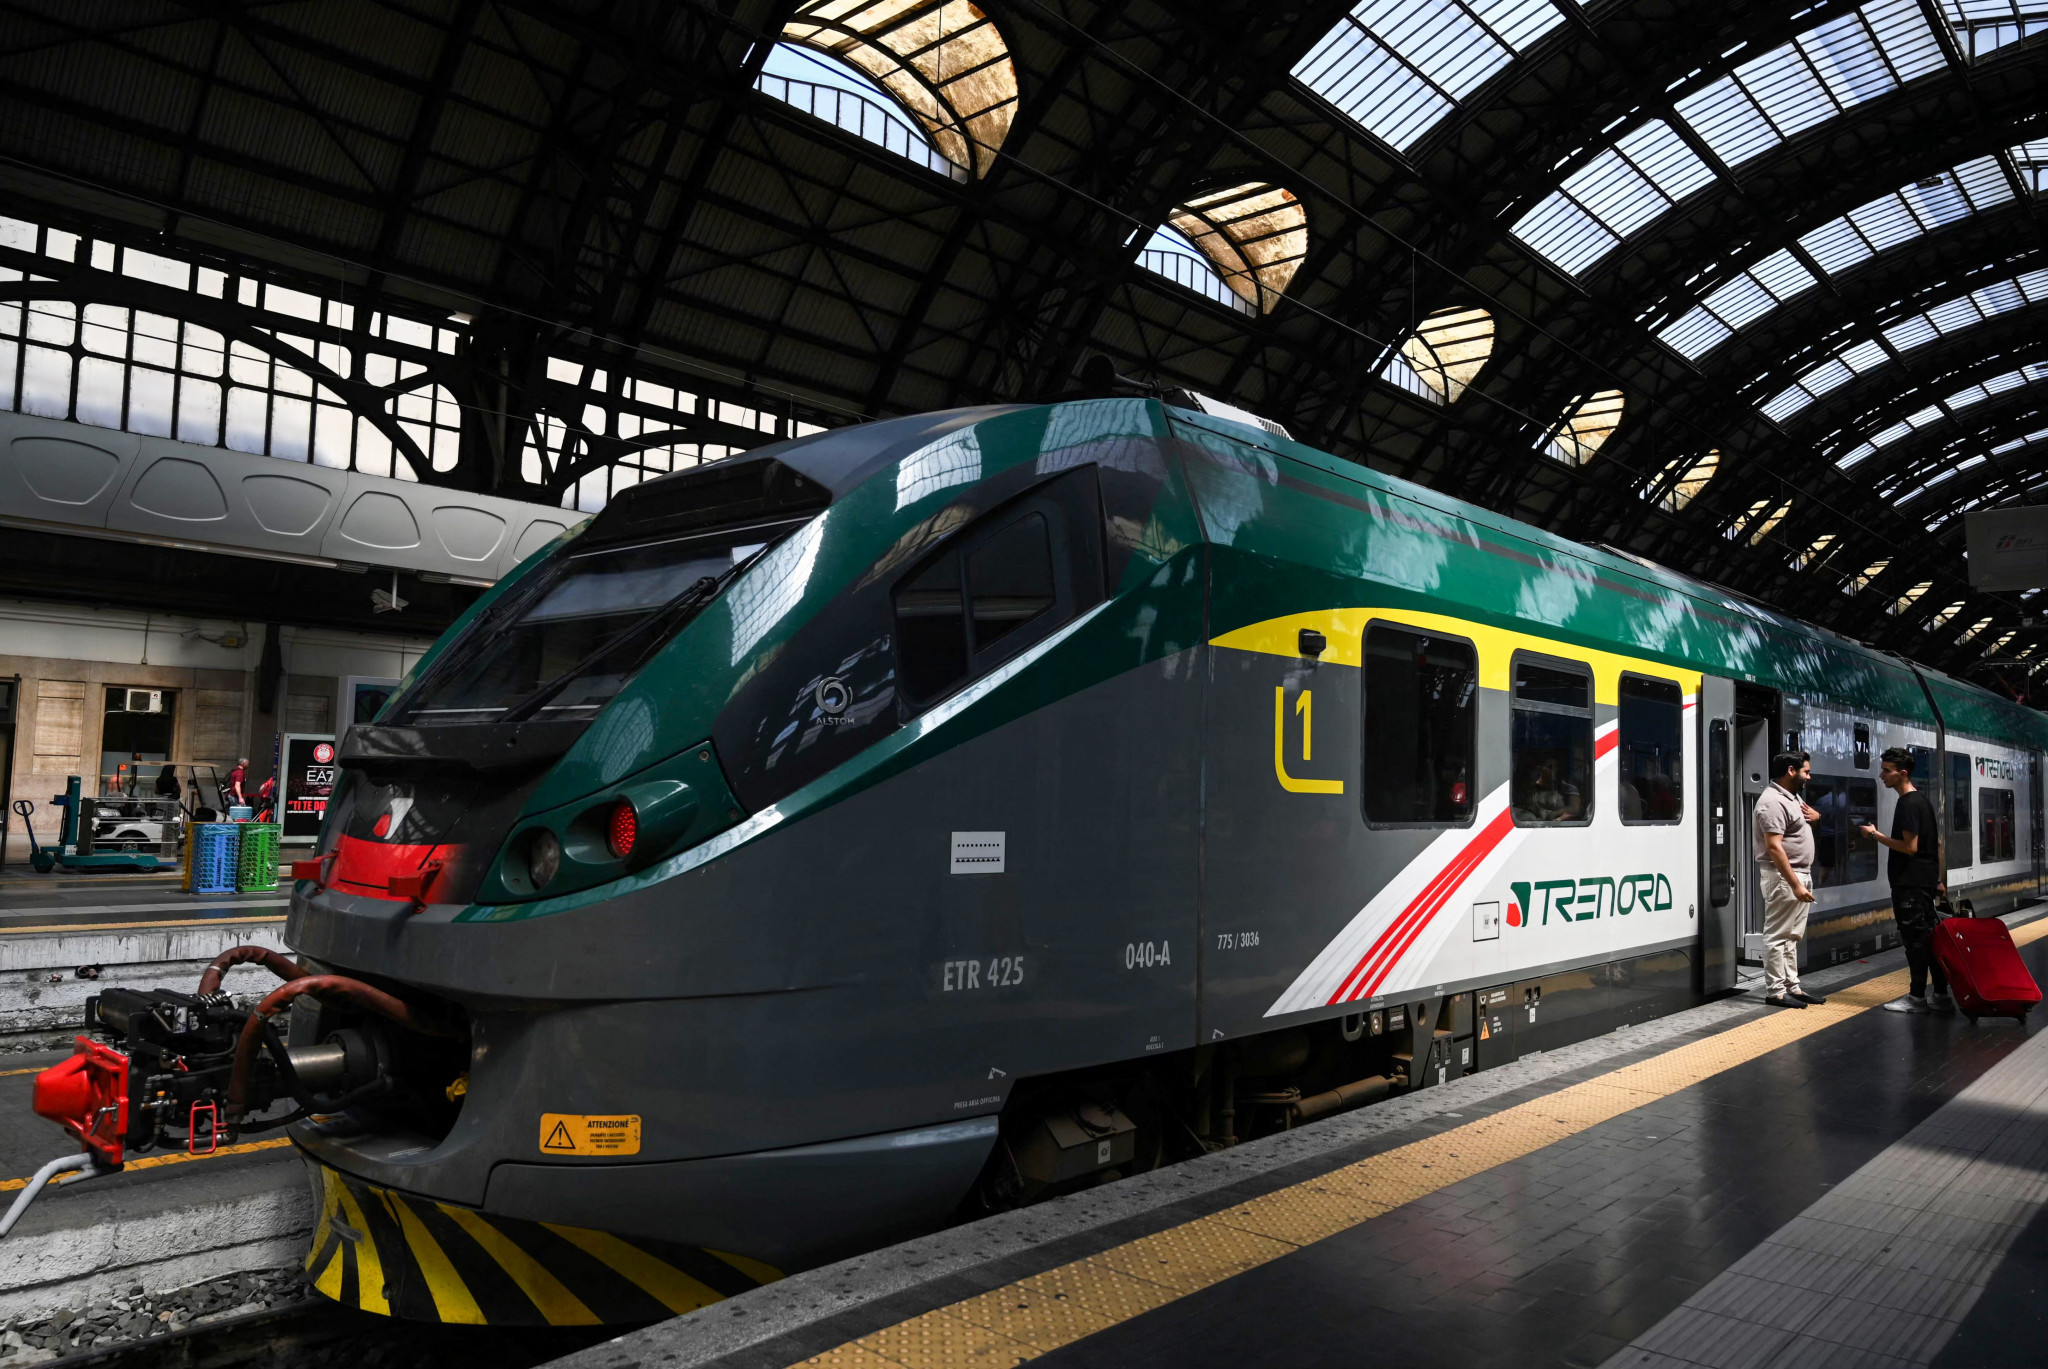 Transport agencies sign agreement to upgrade connections for Milan Cortina 2026